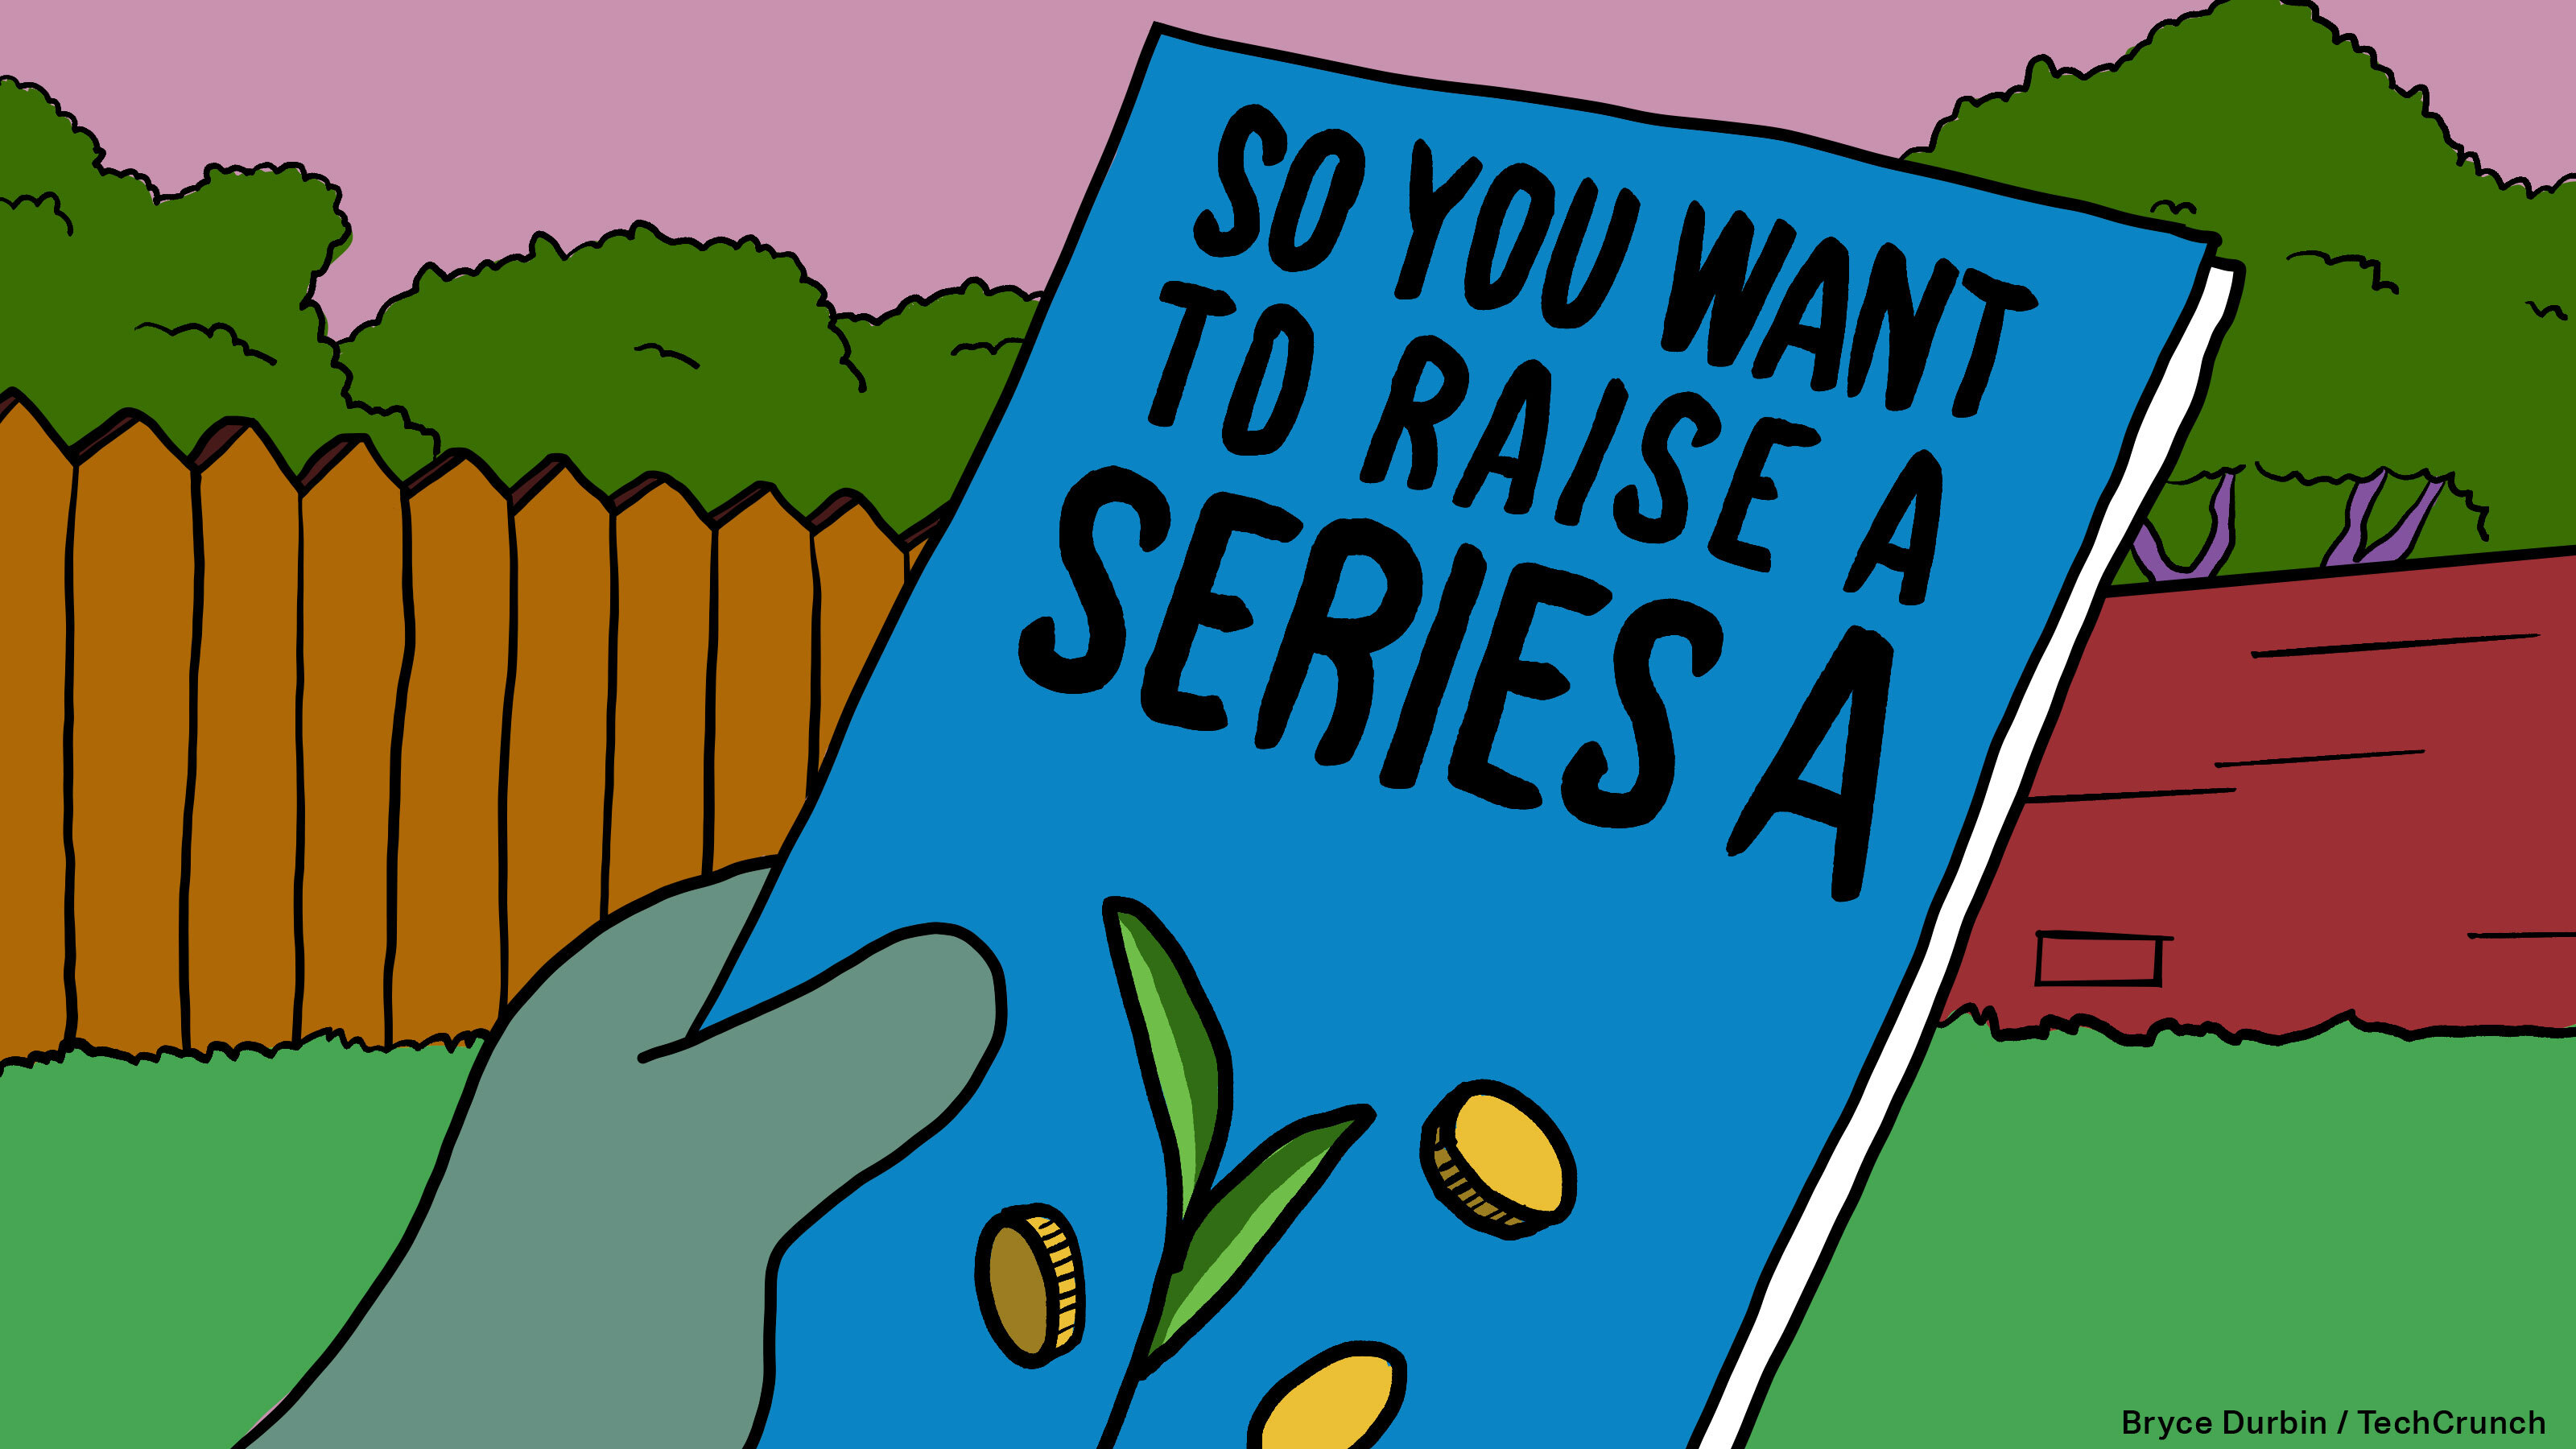 "So you want to raise a Series A" pamphlet in the style of "The Simpsons"